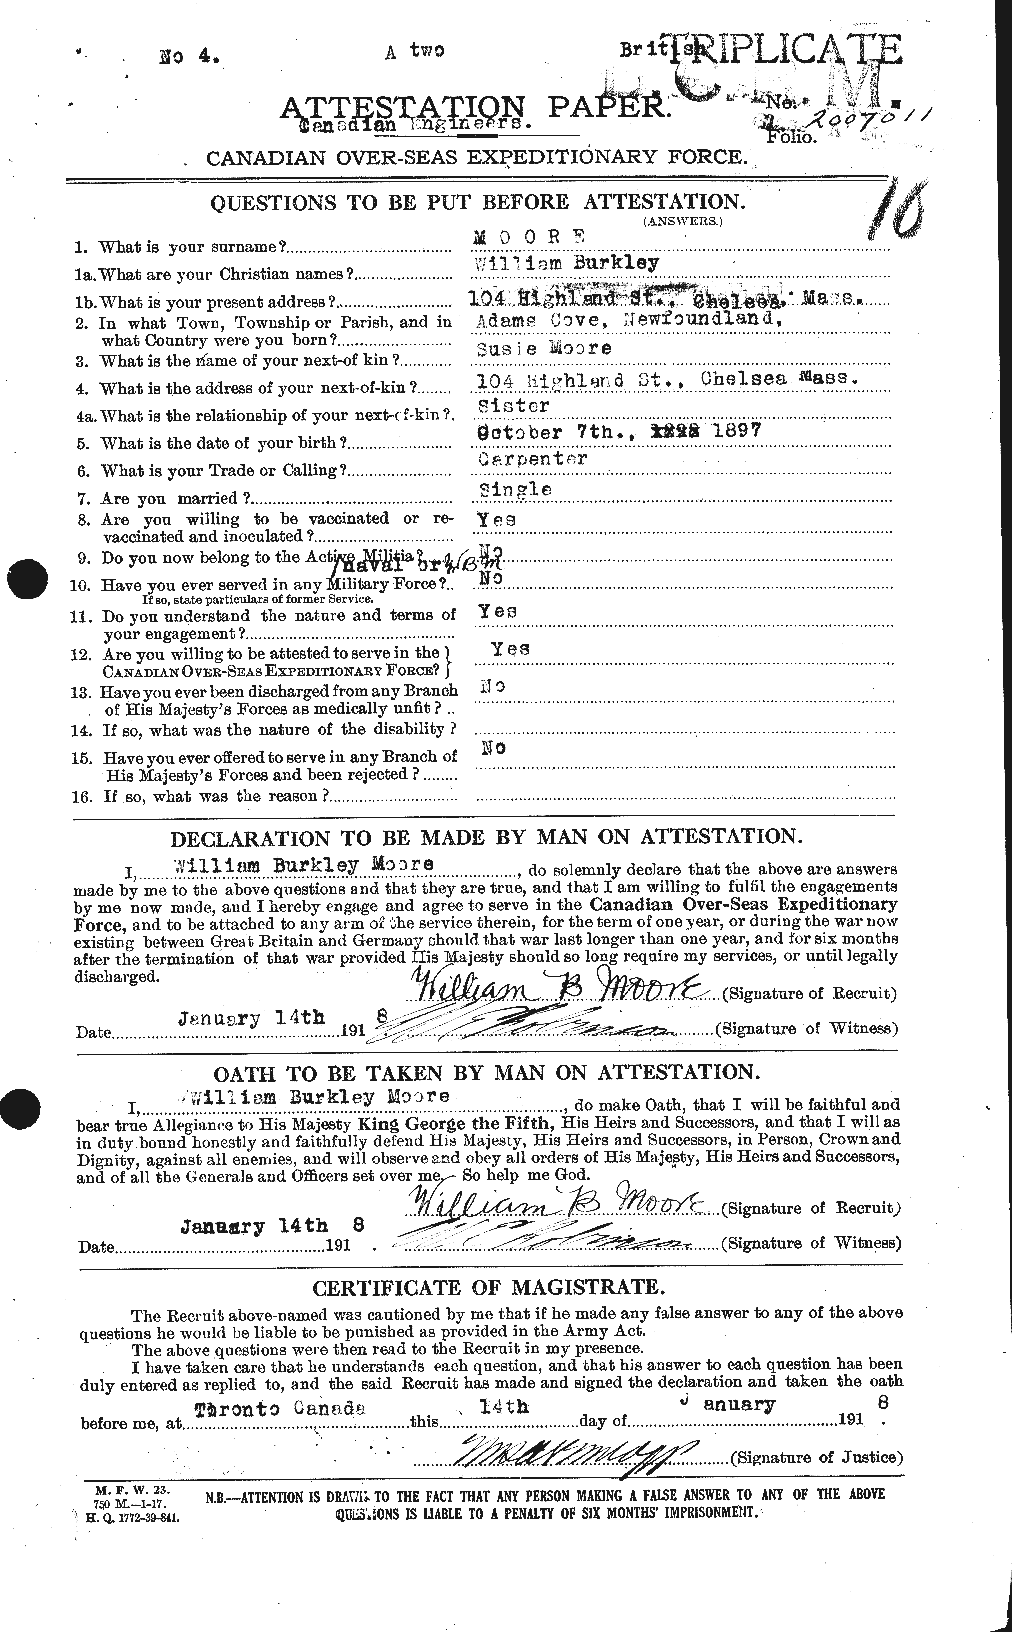 Personnel Records of the First World War - CEF 505783a